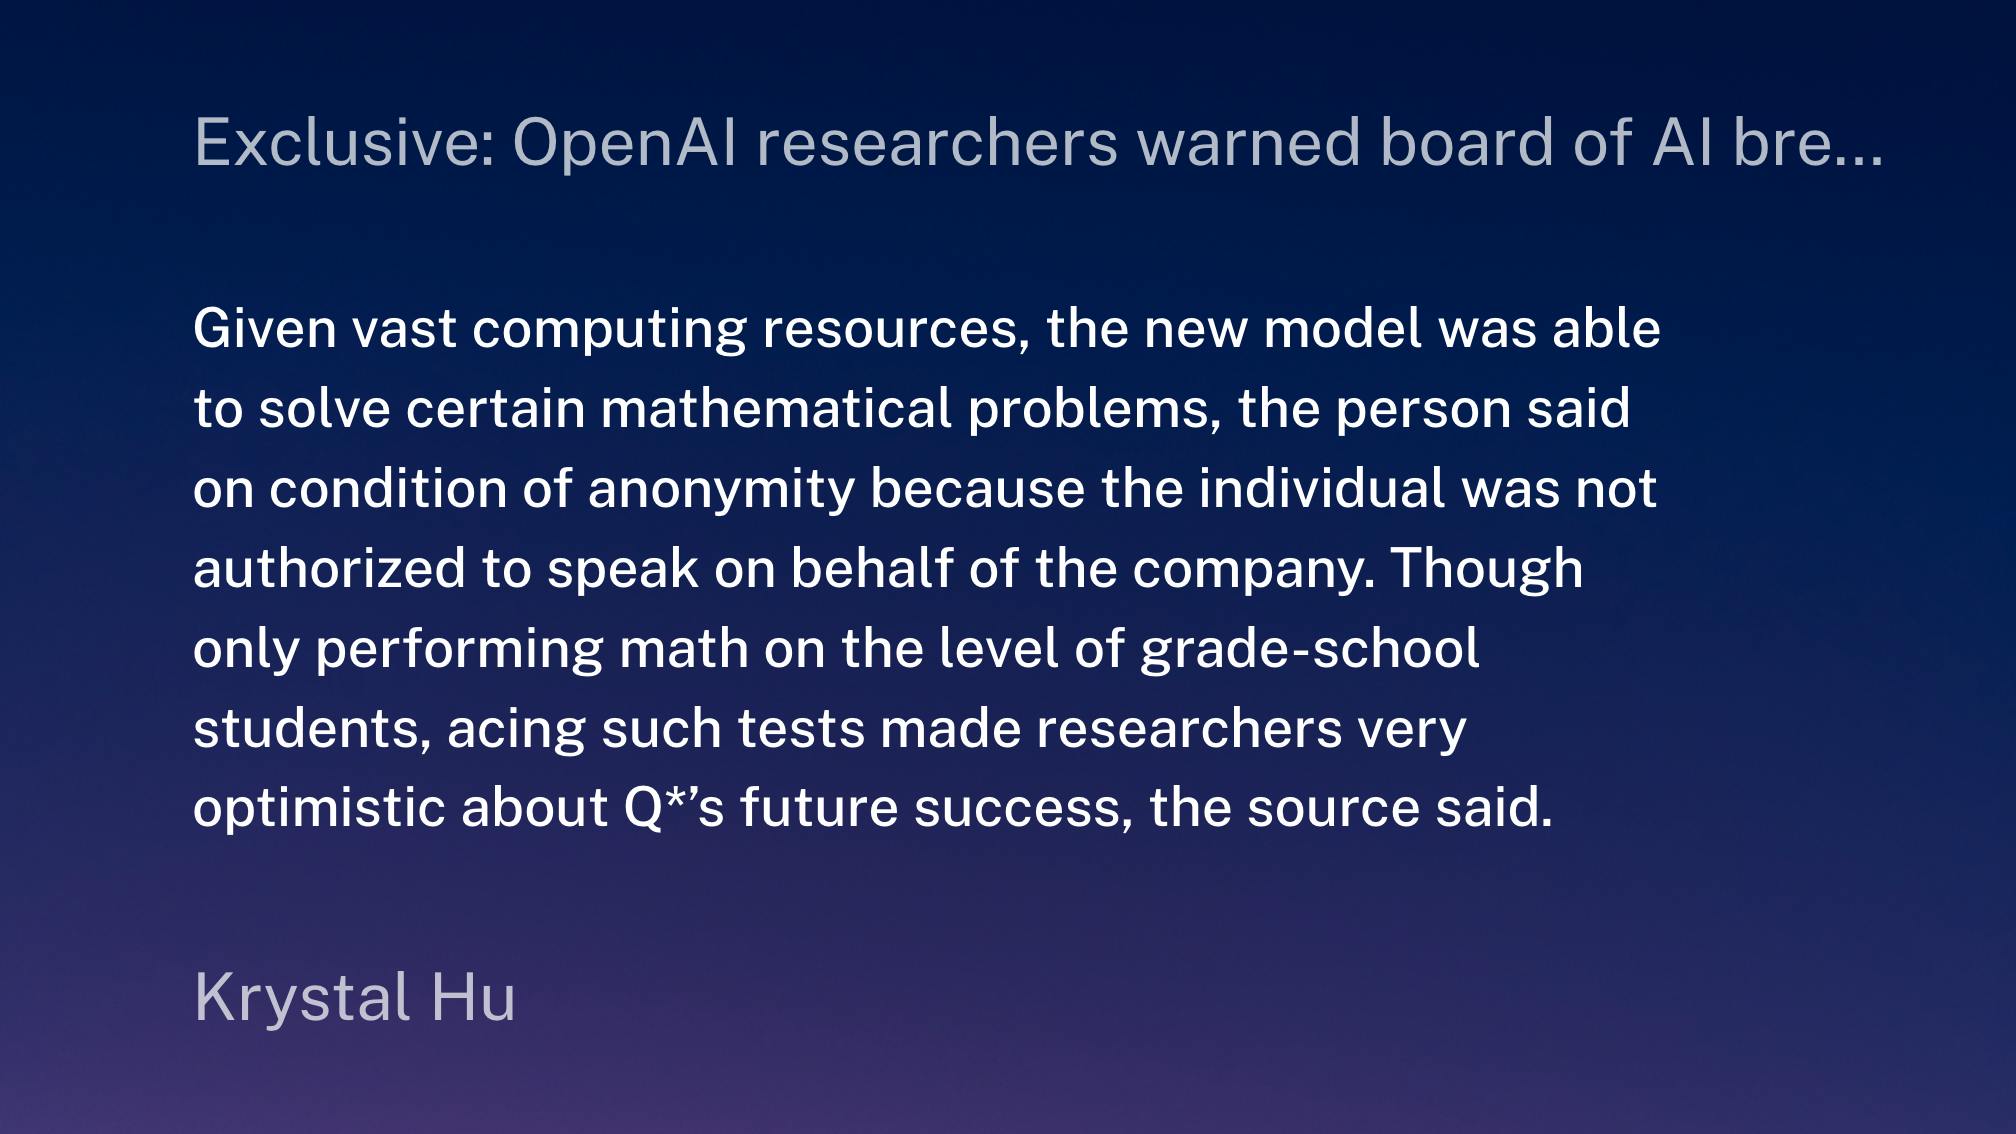 Exclusive_ OpenAI researchers warned board of AI breakthrough ahead of CEO ouster, sources say